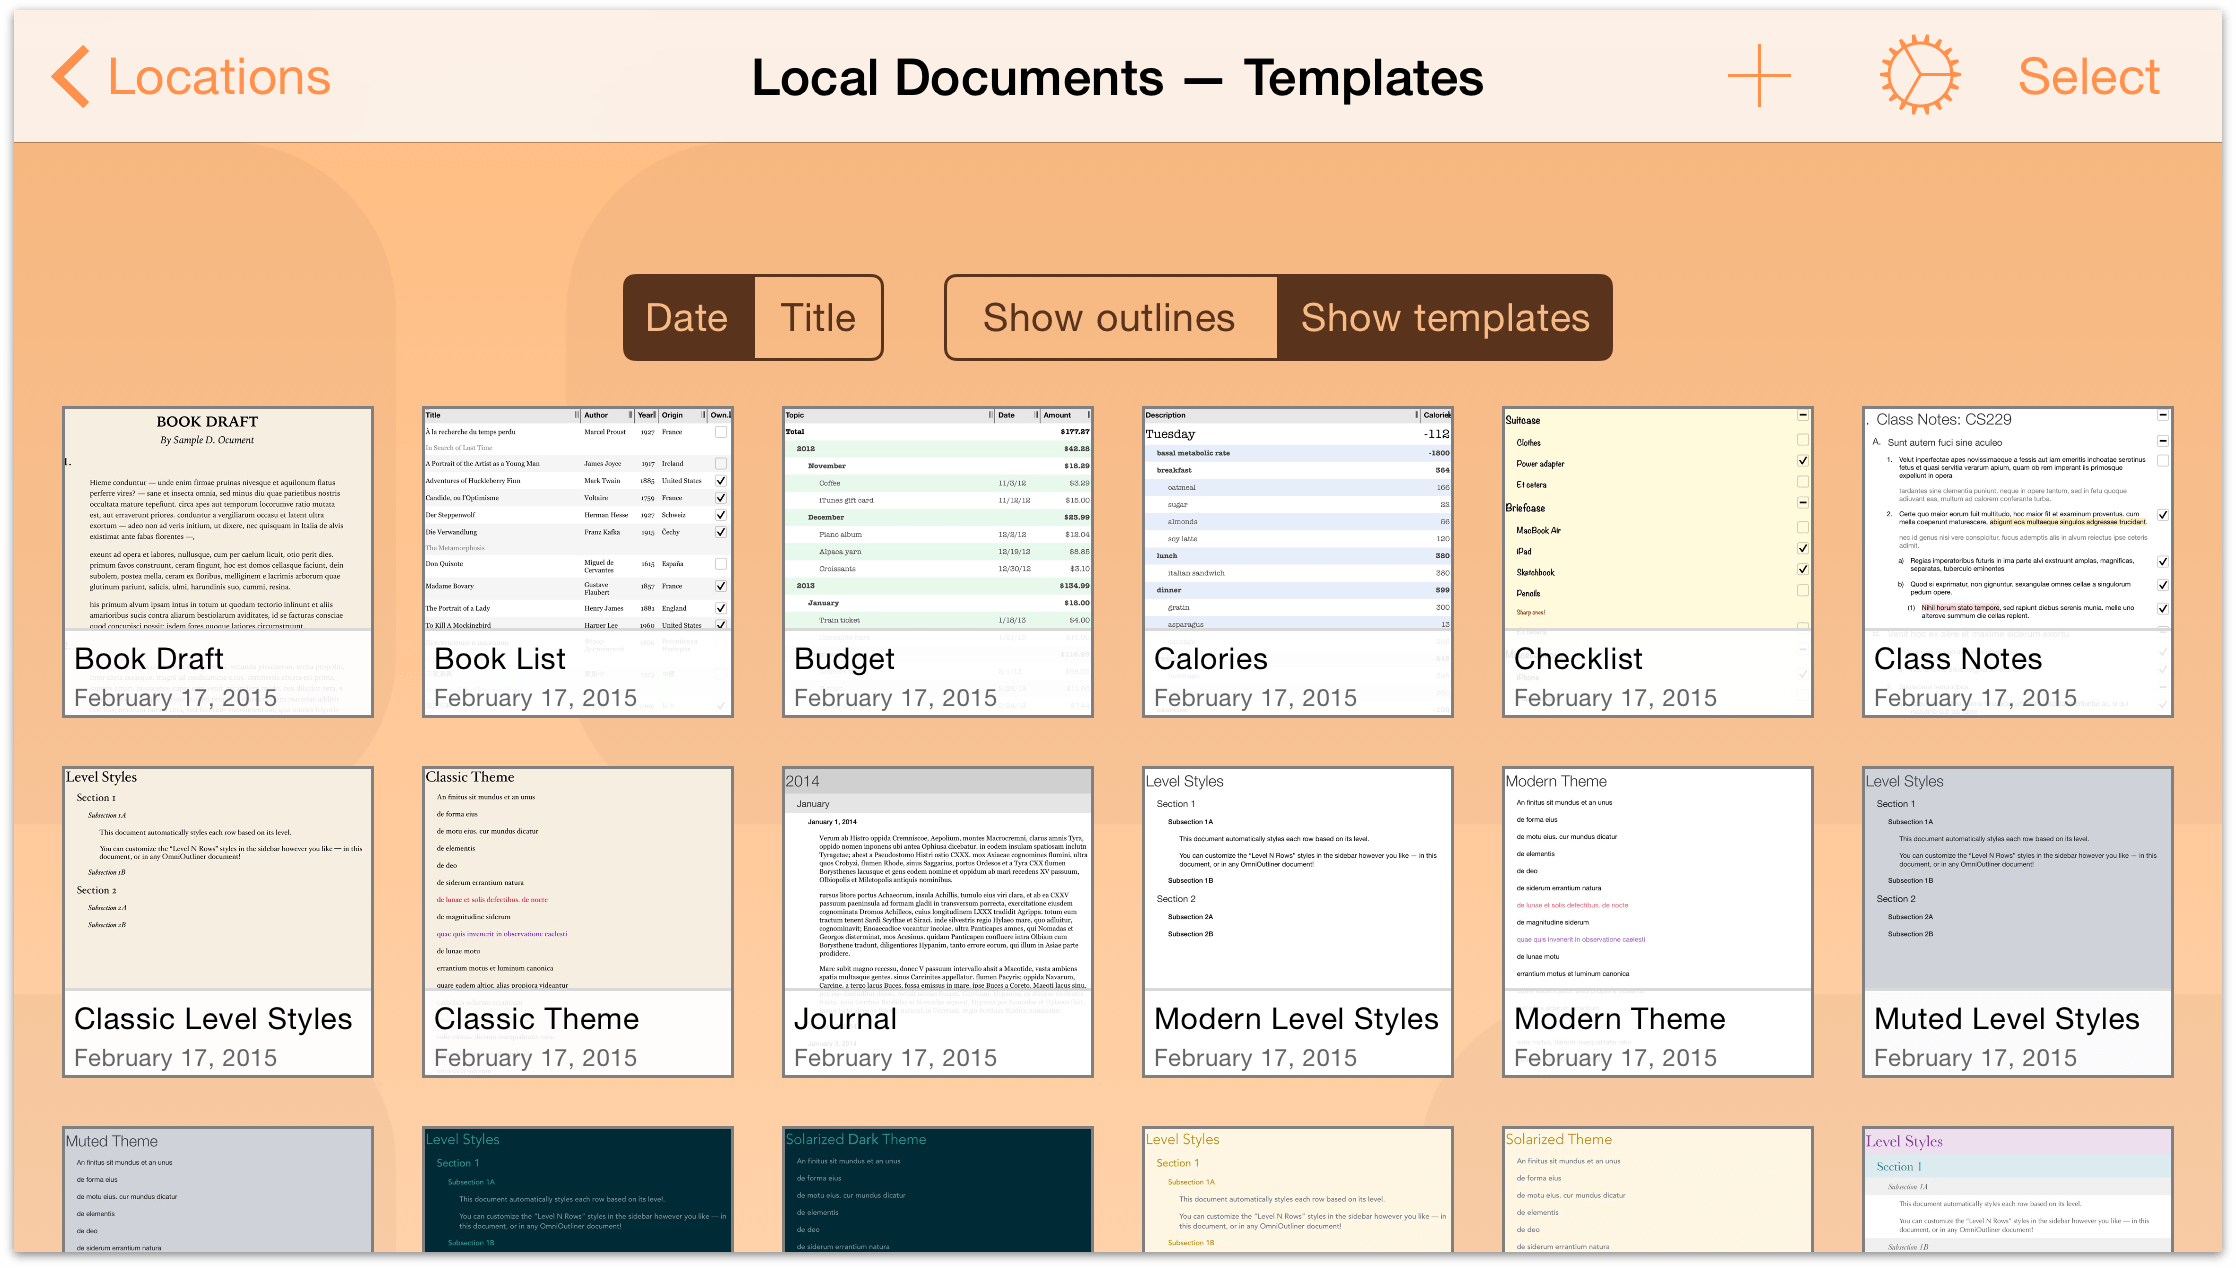 Tap Show templates to see the available templates